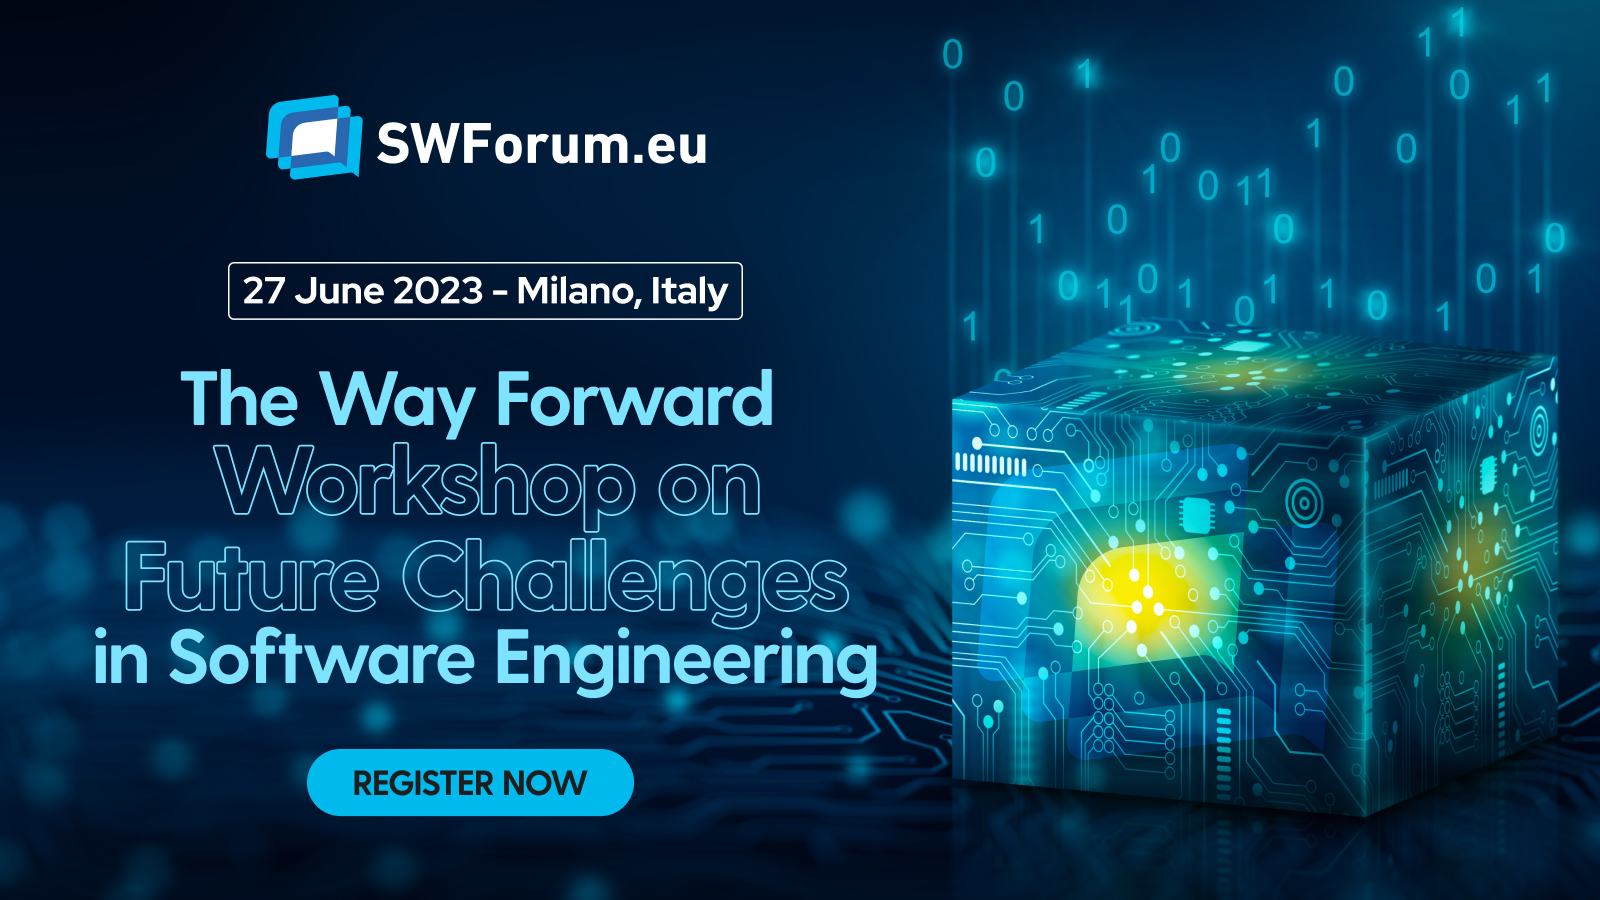 Join the Free Workshop on Future Challenges in Software Engineering | 27 June 2023, Milan